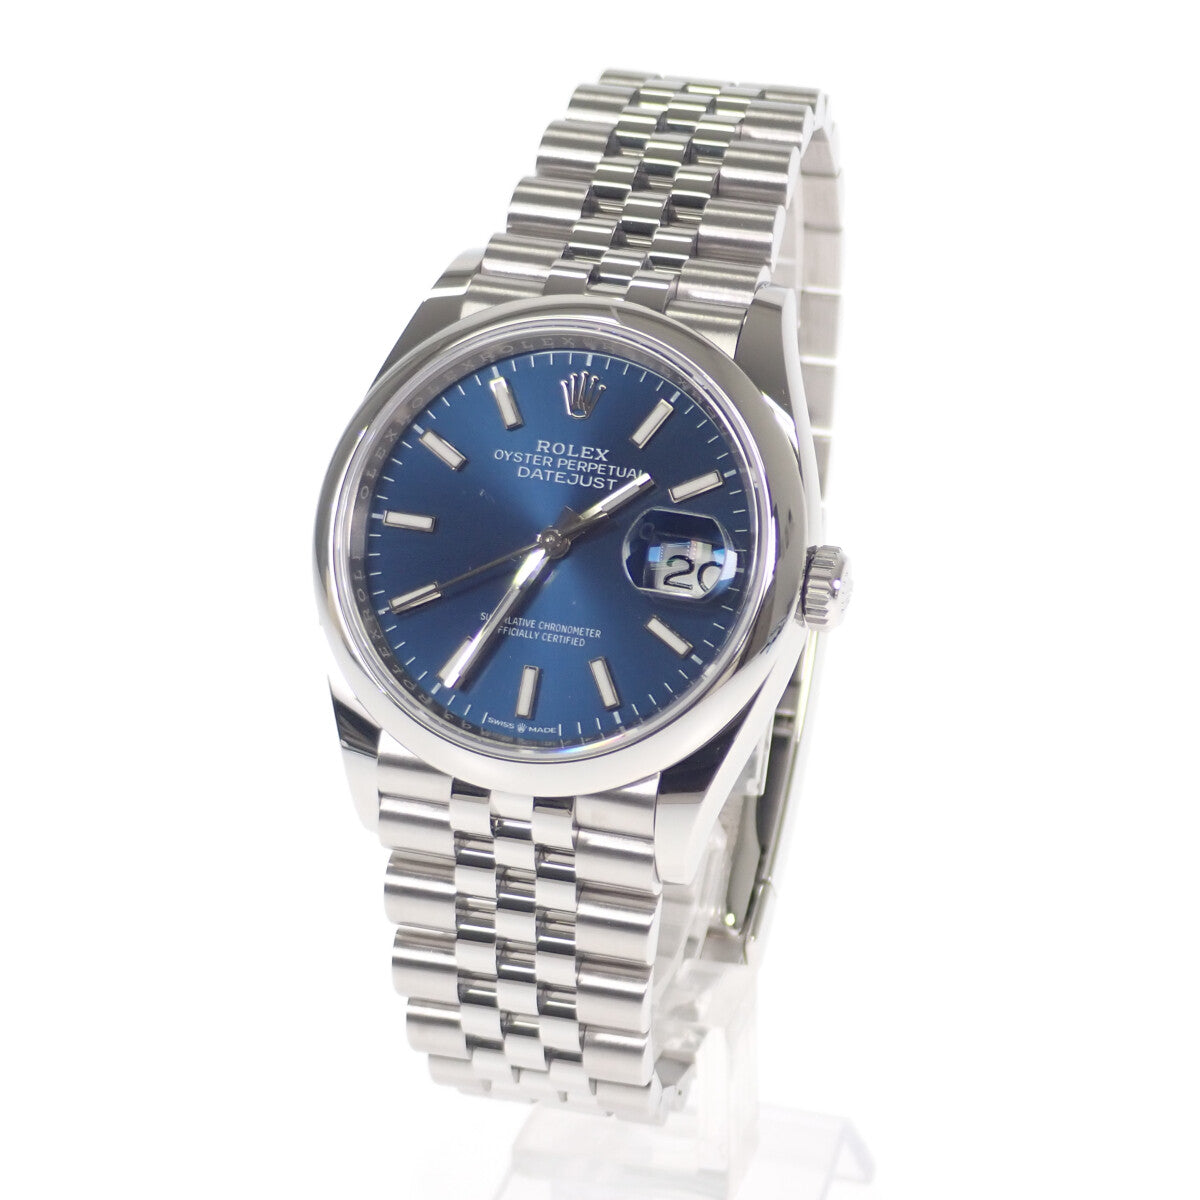 Rolex Men's Datejust 36 Watch 126200 with Blue Dial, Stainless Steel Oyster, and Jubilee Bracelet (Pre-owned) 126200.0